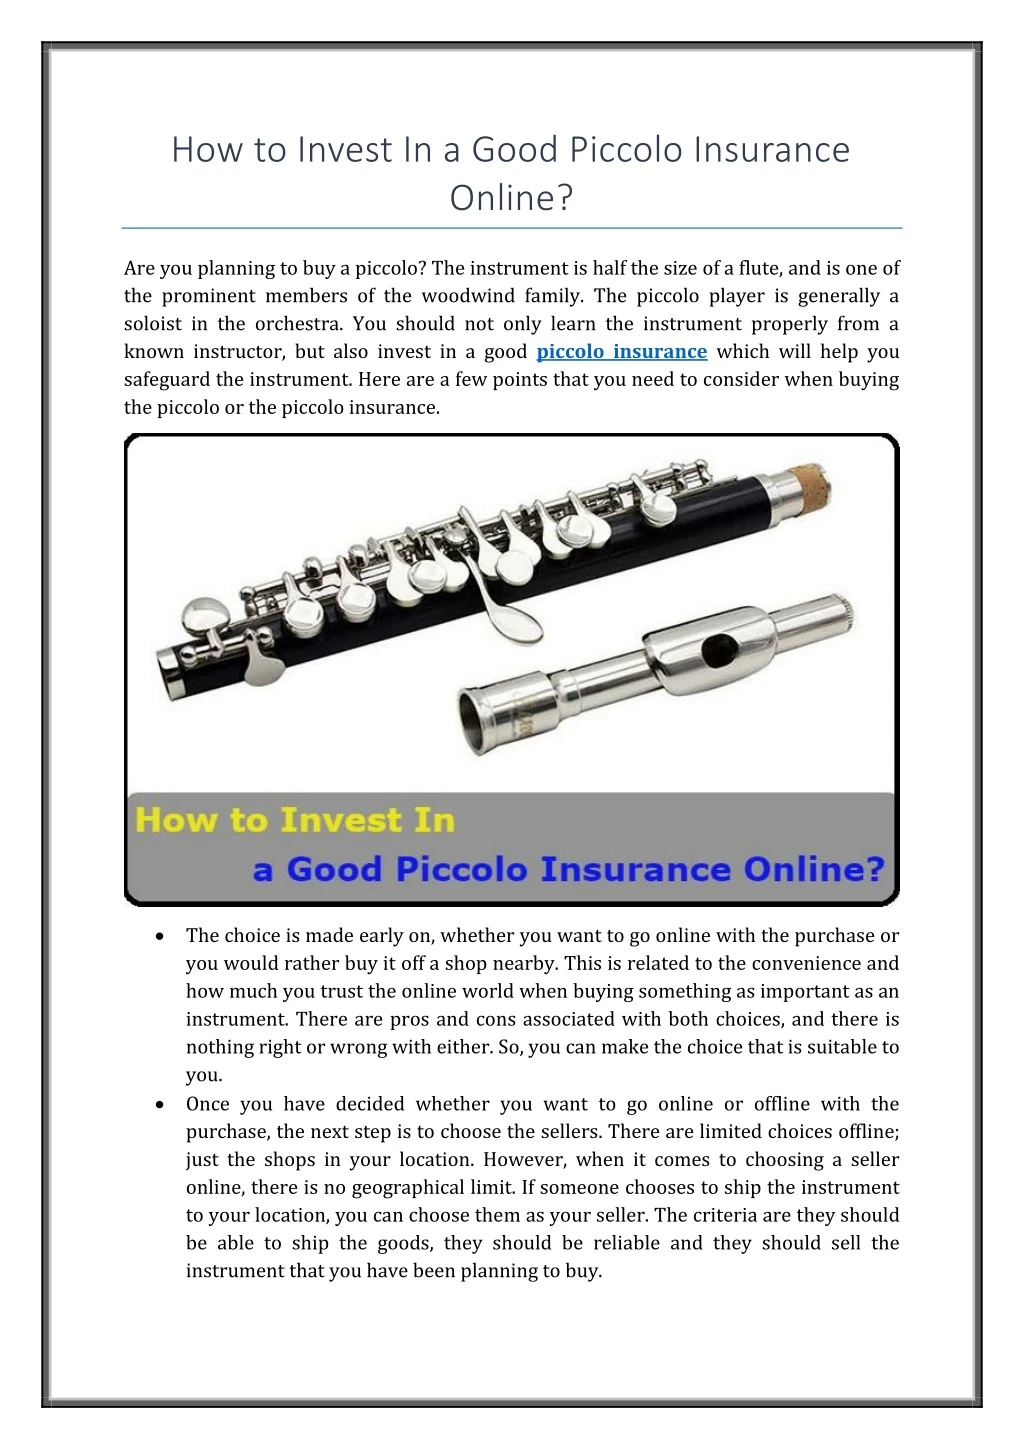 how to invest in a good piccolo insurance online